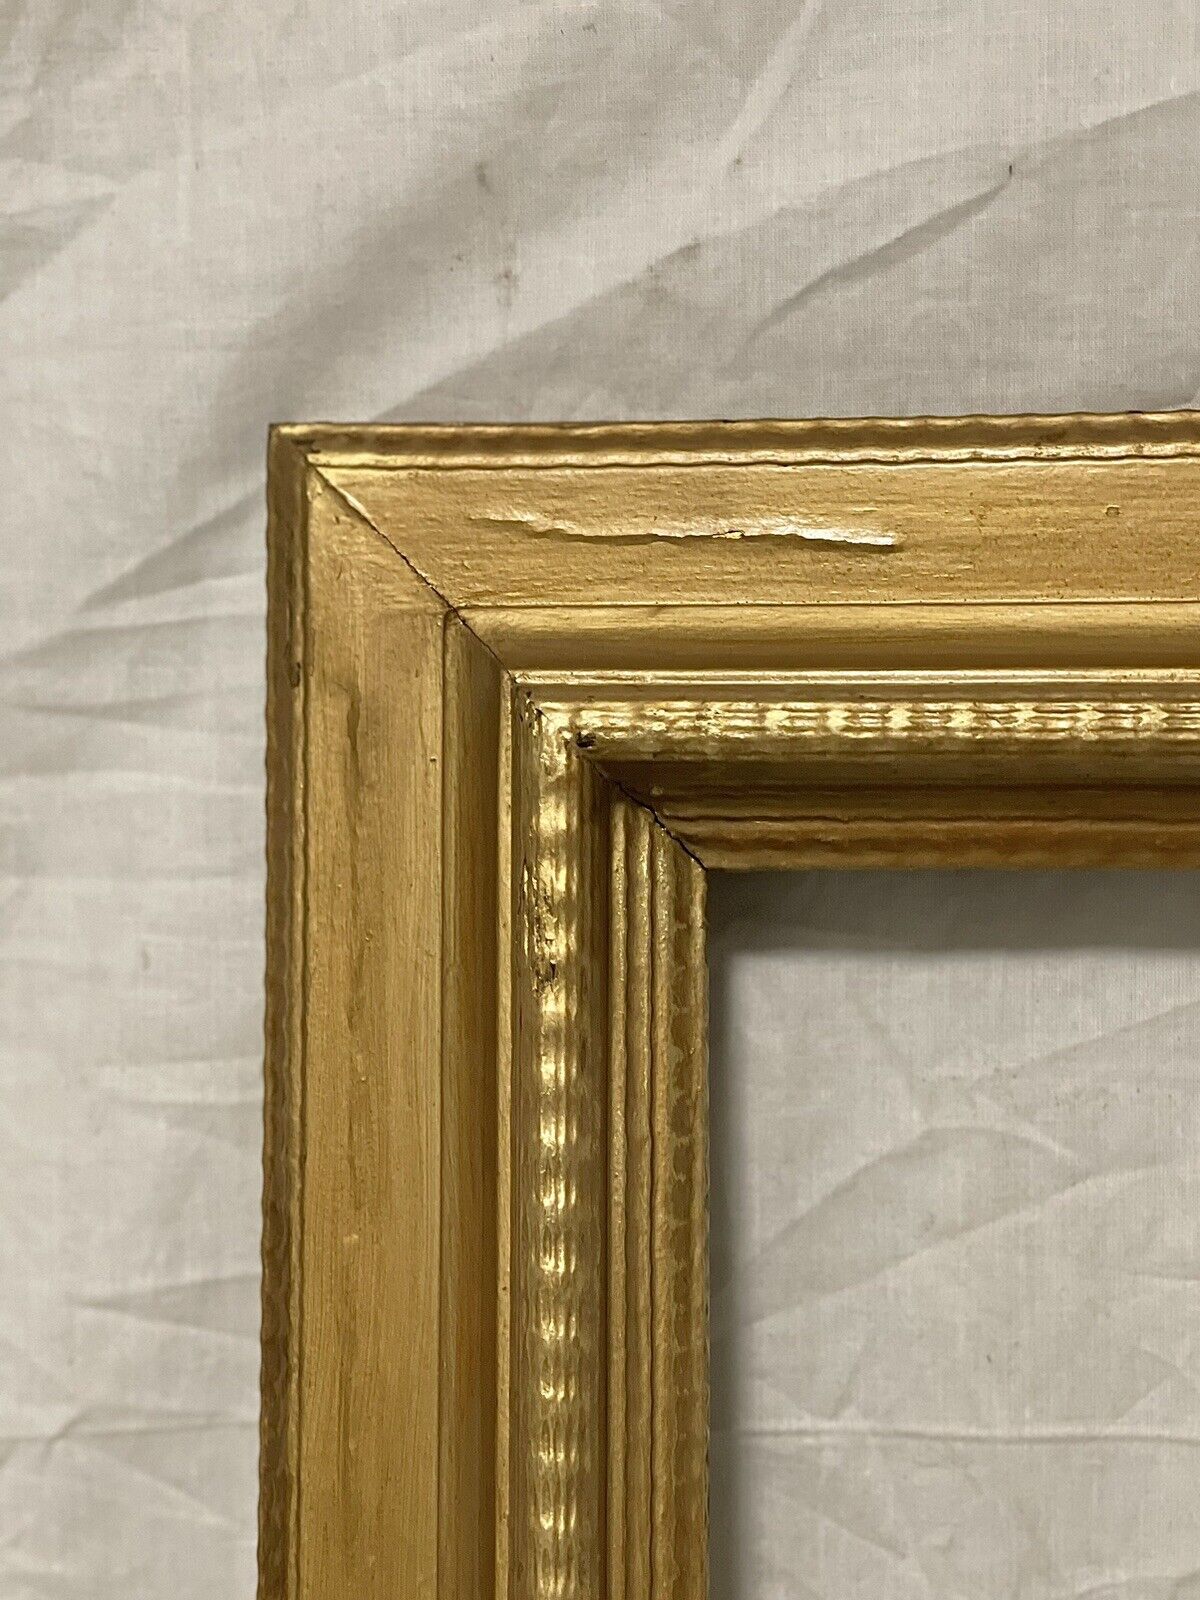 ANTIQUE FITs 12”x16” GOLD GILT AMERICAN VICTORIAN RIPPLE PICTURE FRAME